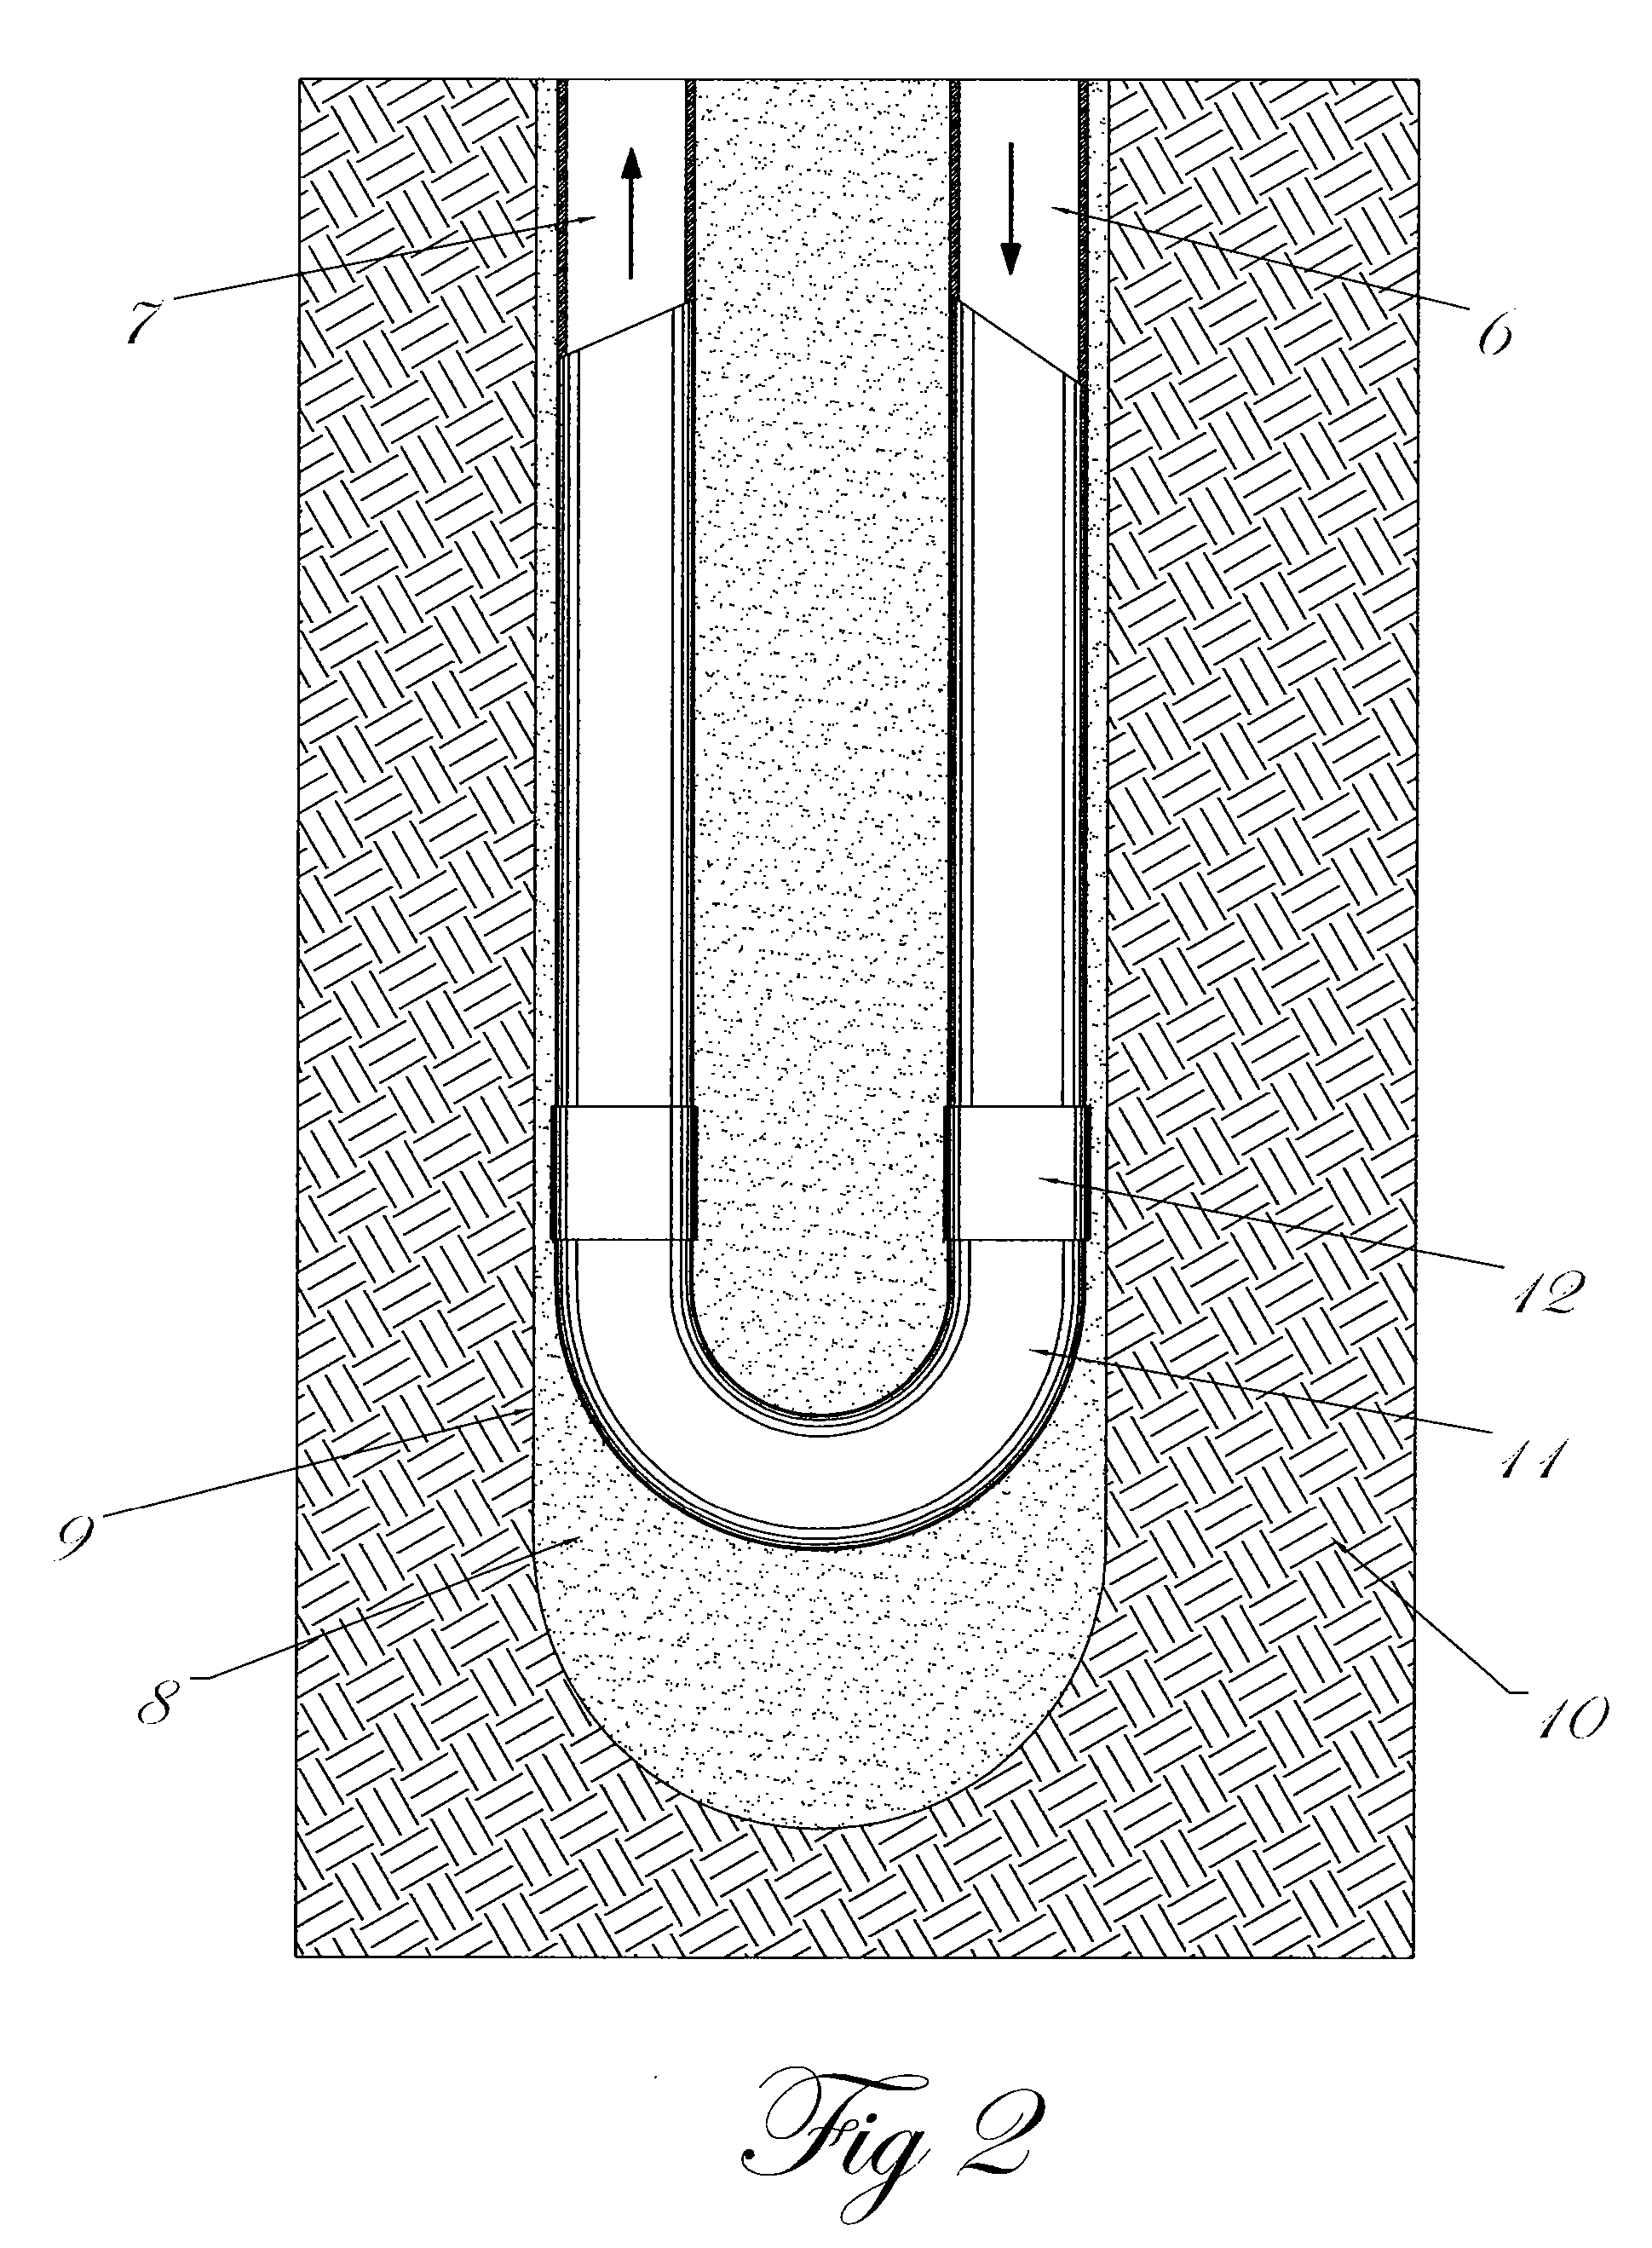 Method and System for Forming a Non-Circular Borehole